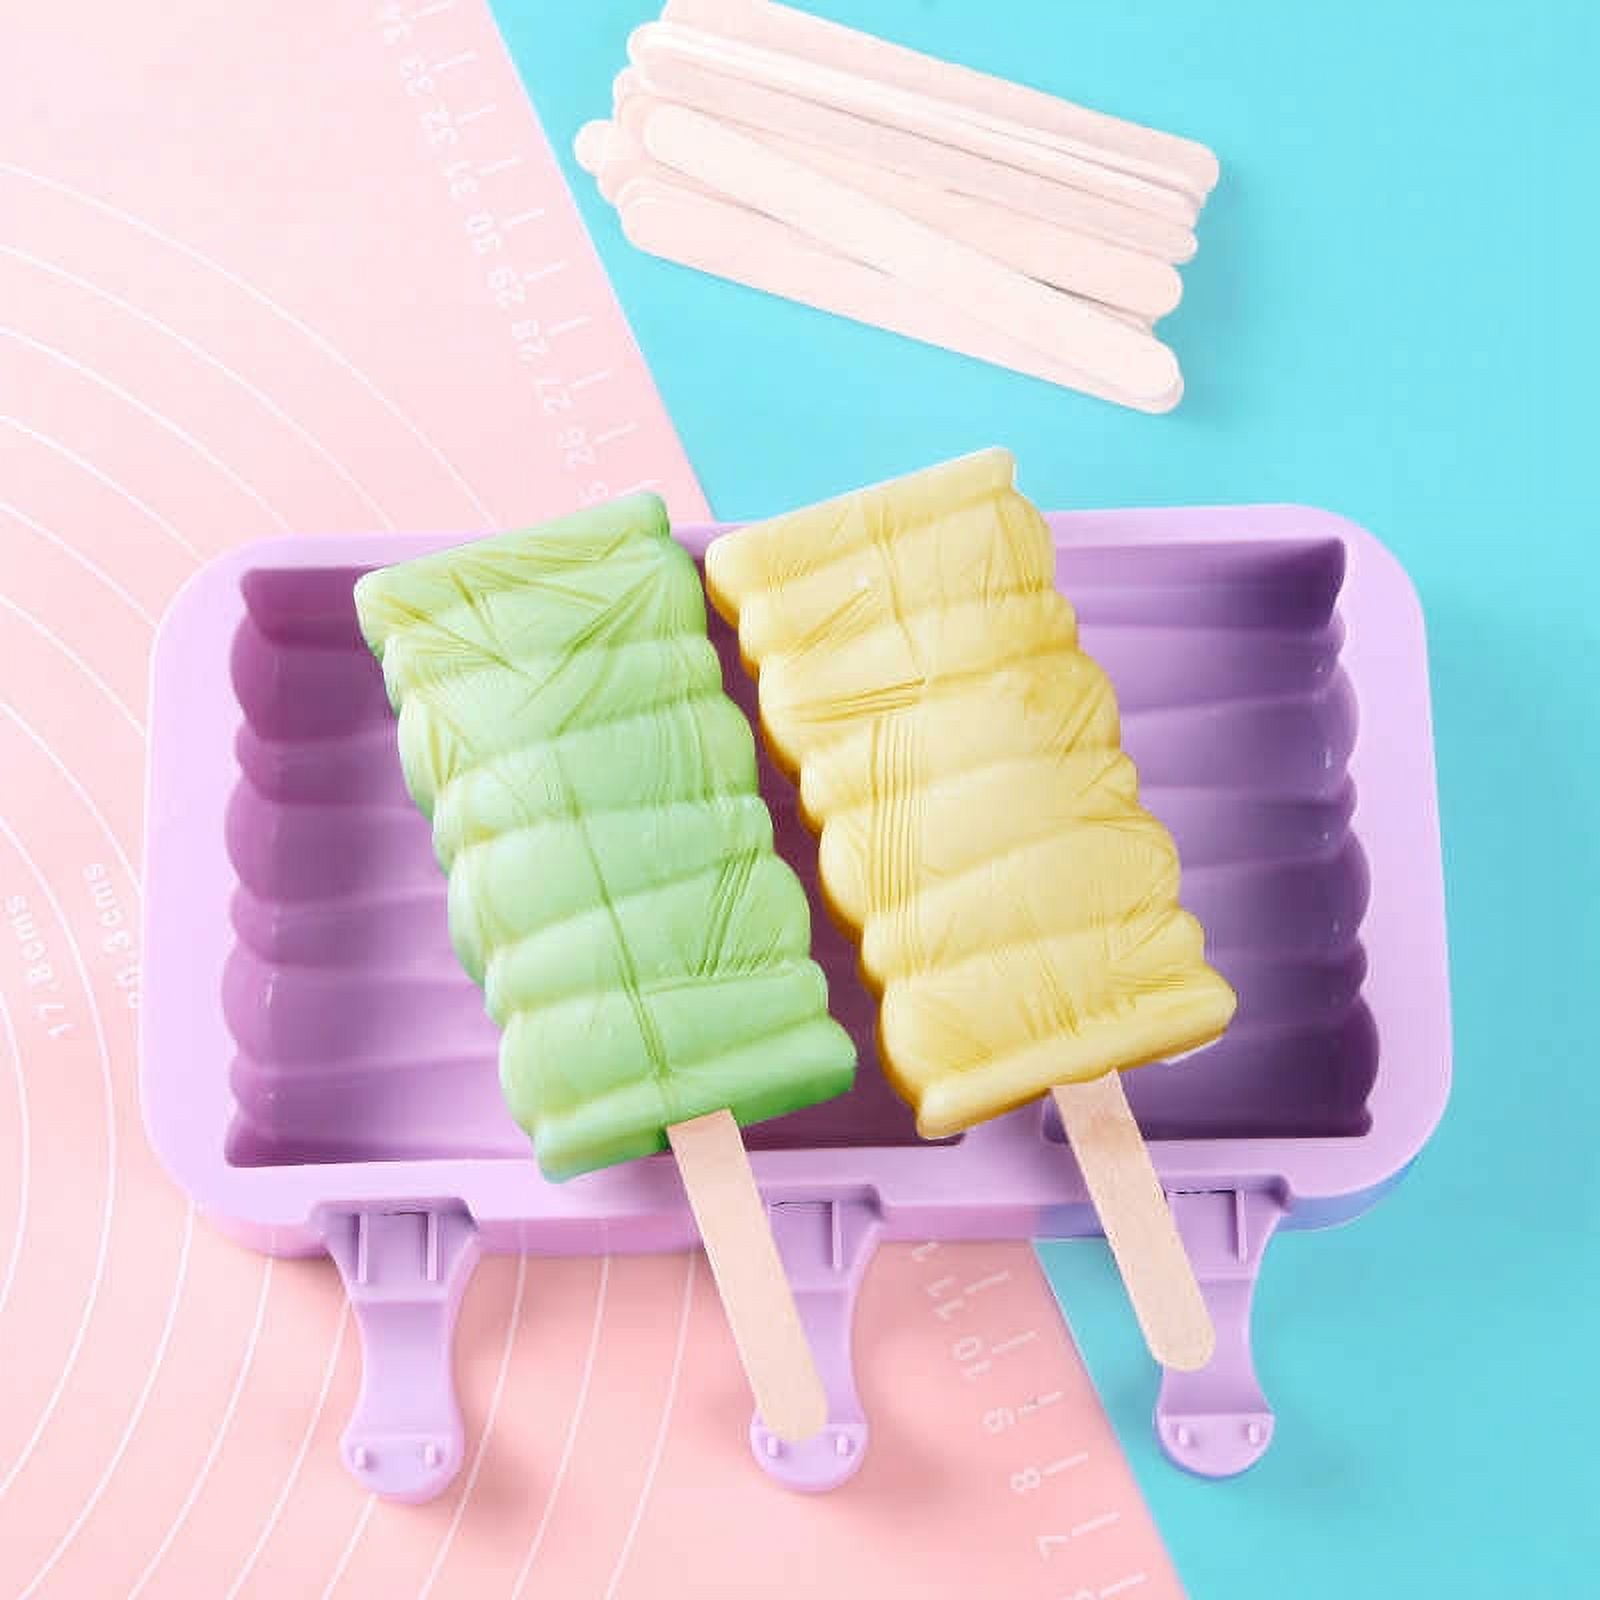 Ice Cream Silicone Mold with 50pcs Sticks Food Grade Popsicle Maker Snowman  Rabbit Shape DIY Children Lolly Moulds Bar Tools - Silicone Molds Wholesale  & Retail - Fondant, Soap, Candy, DIY Cake Molds